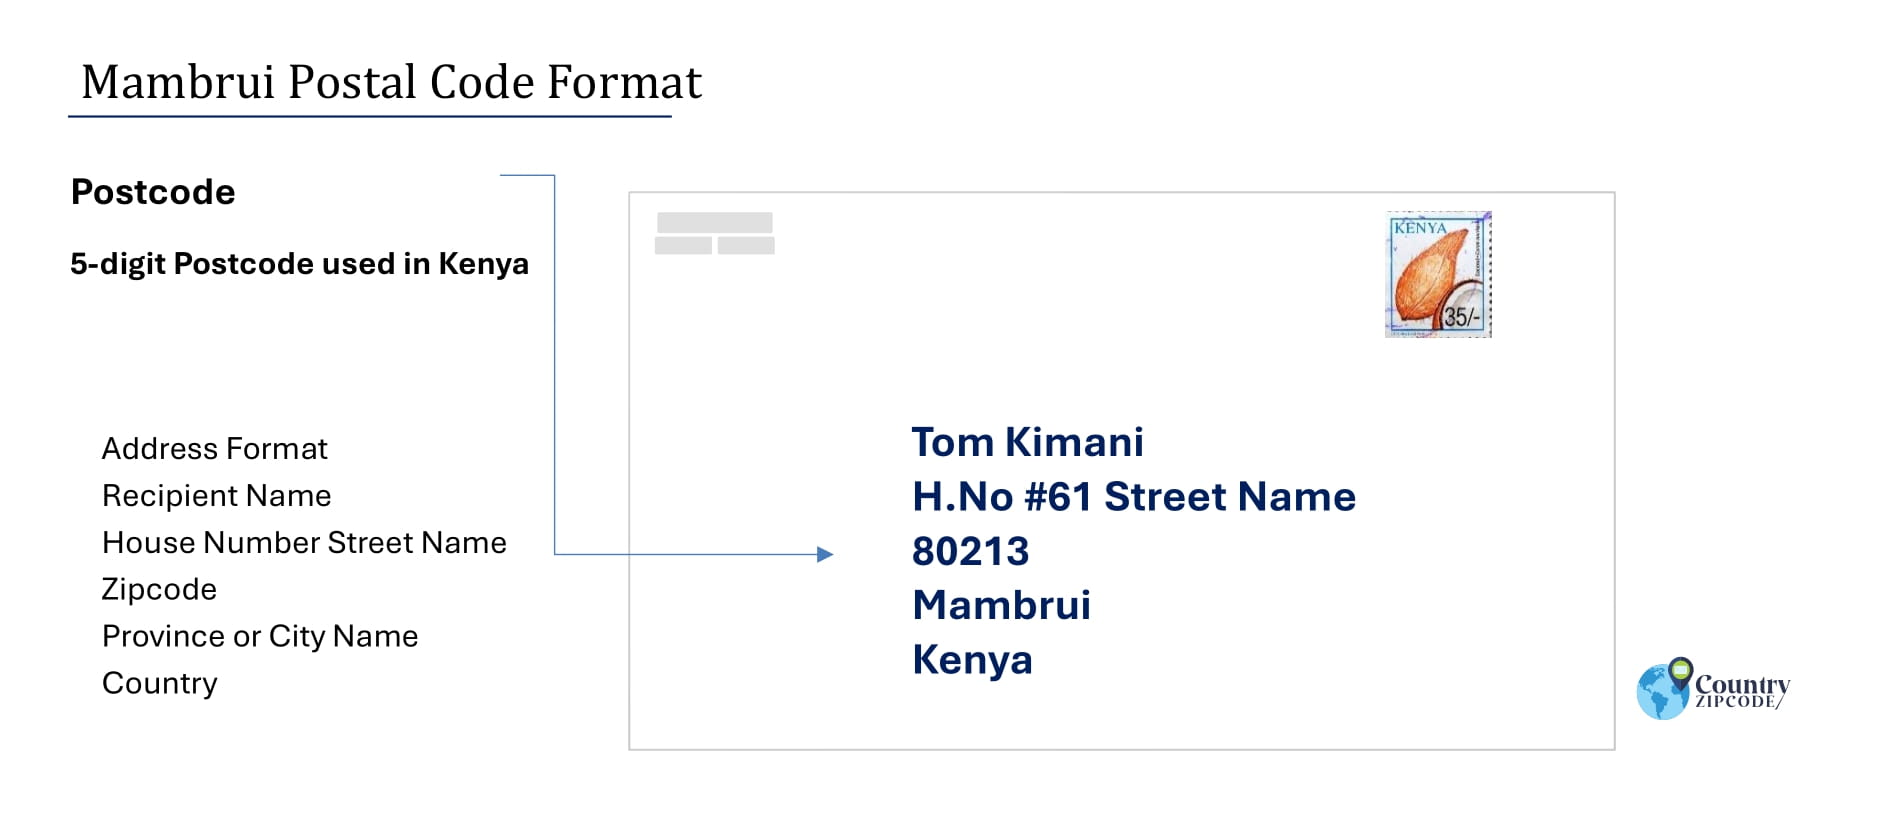 Example of Mambrui Address and postal code format